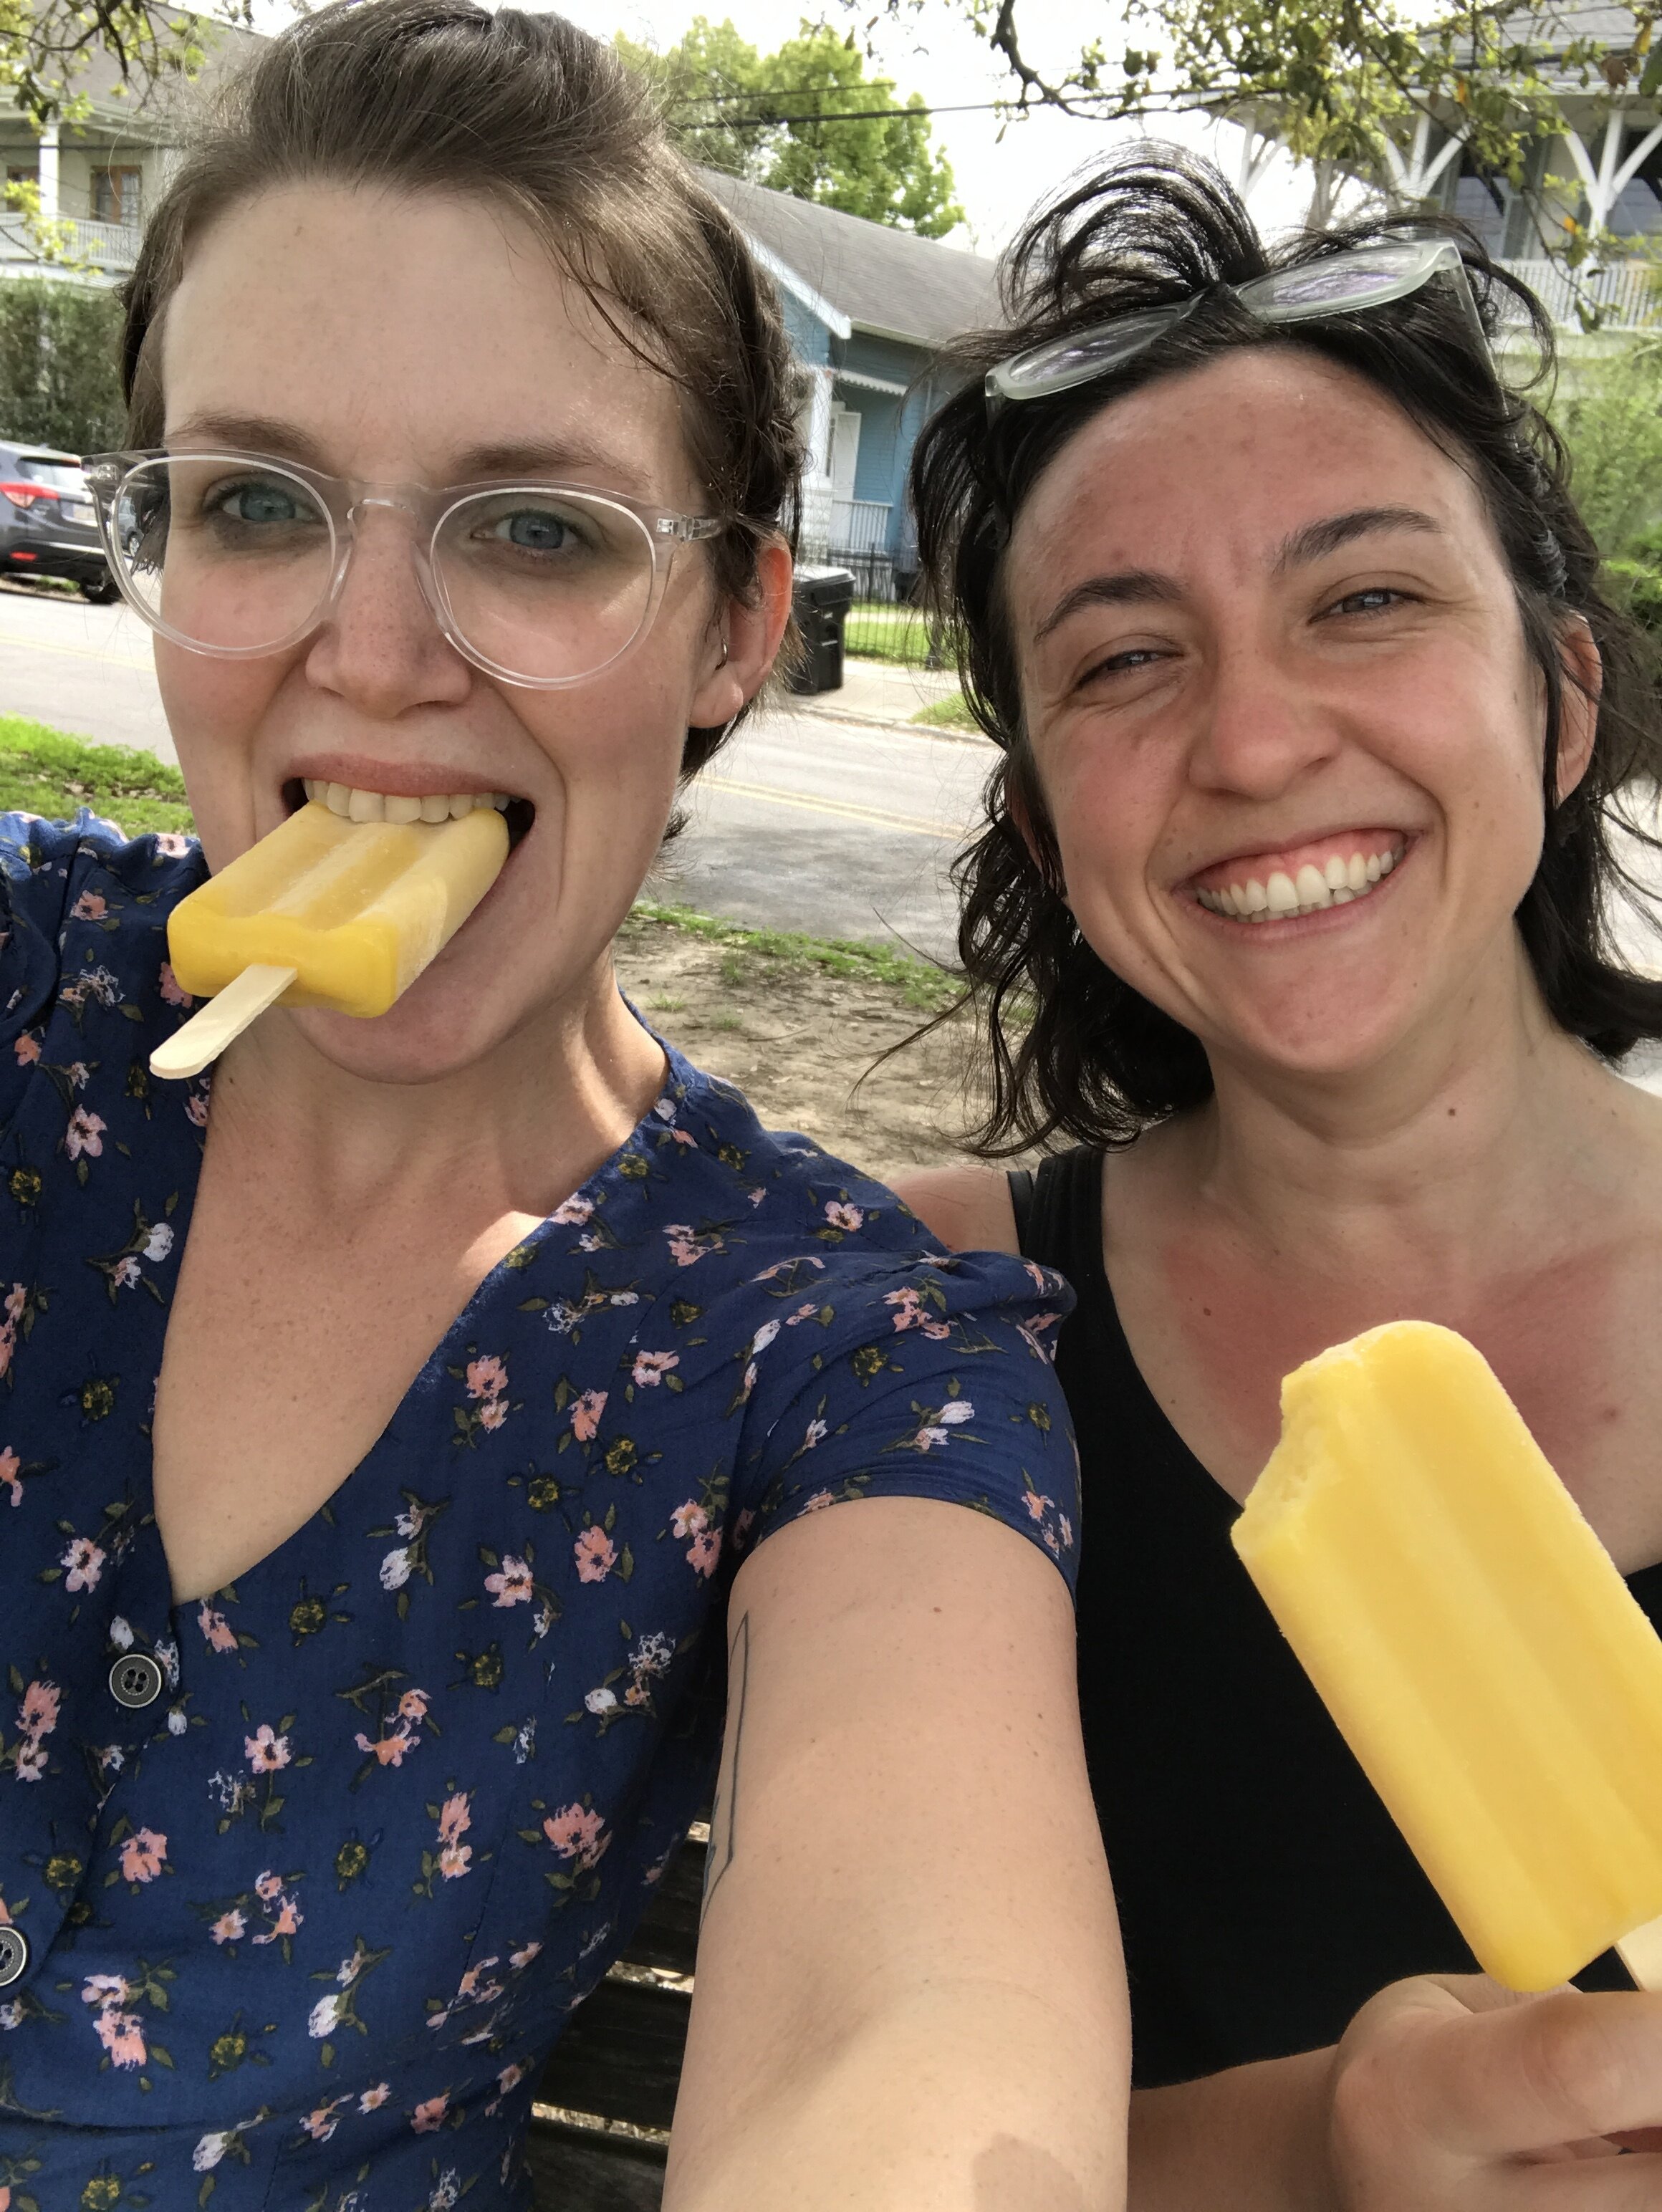  This is one of my best friends in the whole world. We eat popsicles together.  